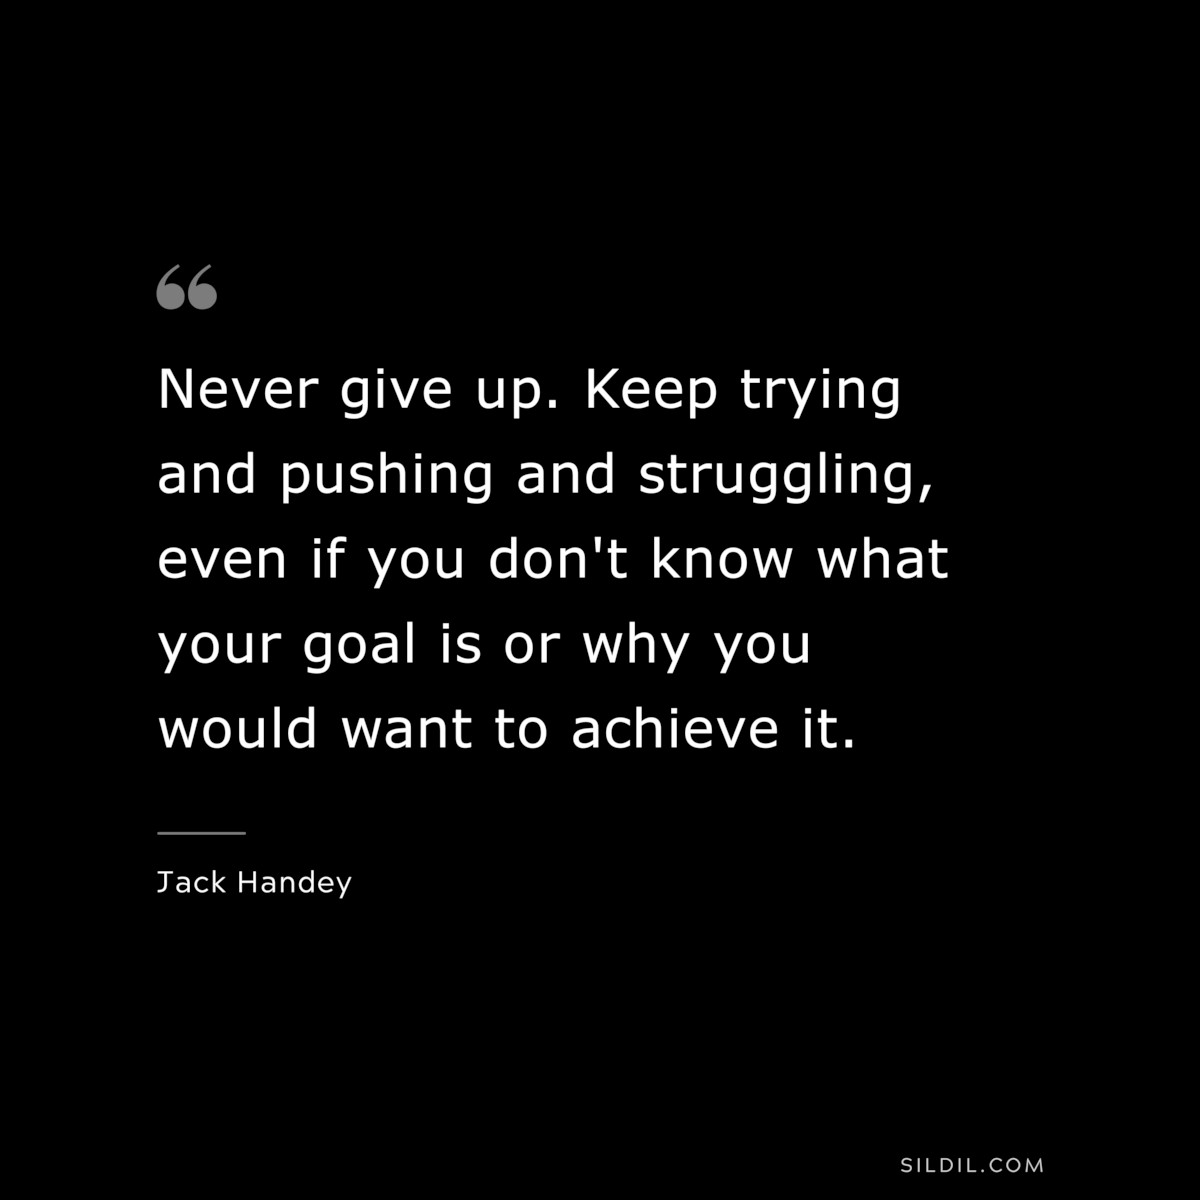 Never give up. Keep trying and pushing and struggling, even if you don't know what your goal is or why you would want to achieve it. ― Jack Handey